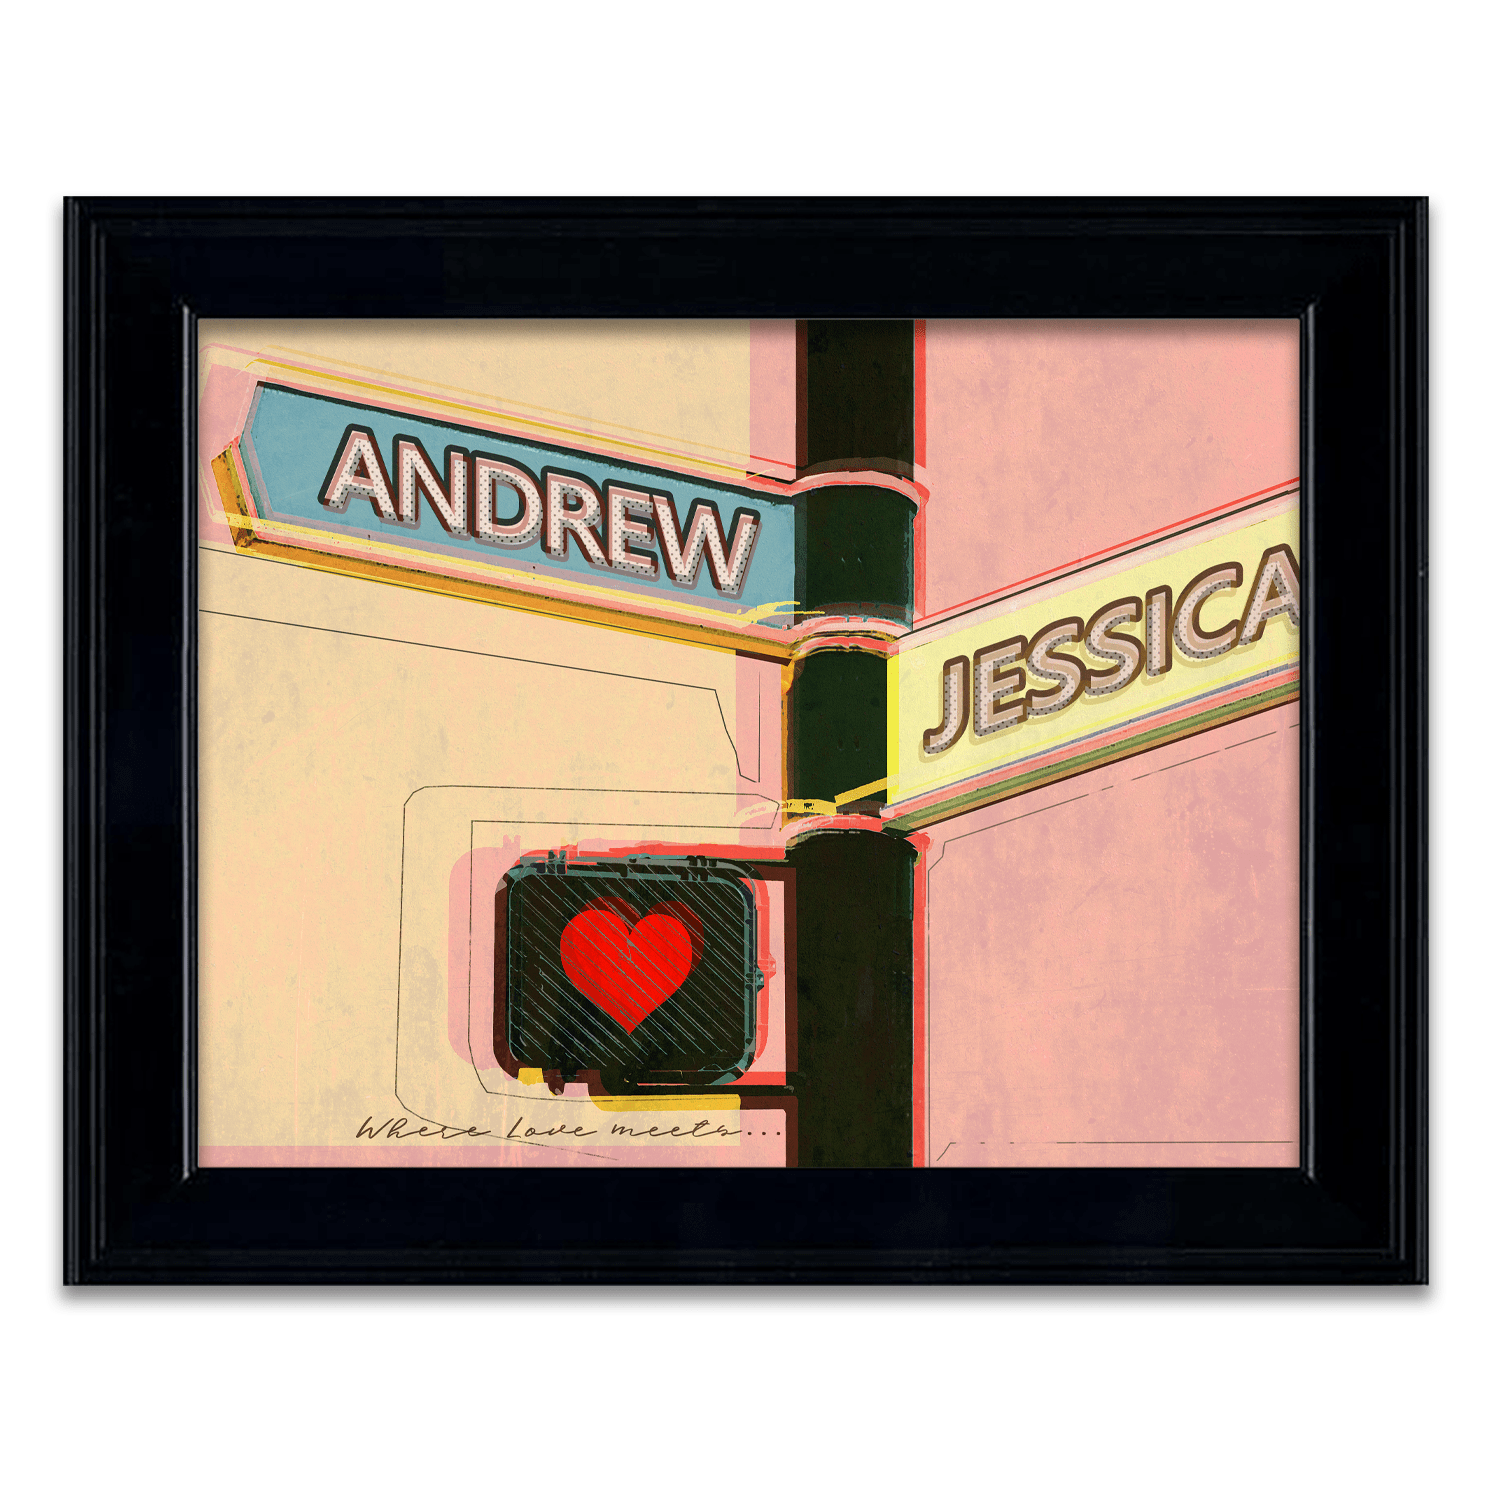 contemporary personalized art with names on the crosswalk sign in this romantic gift